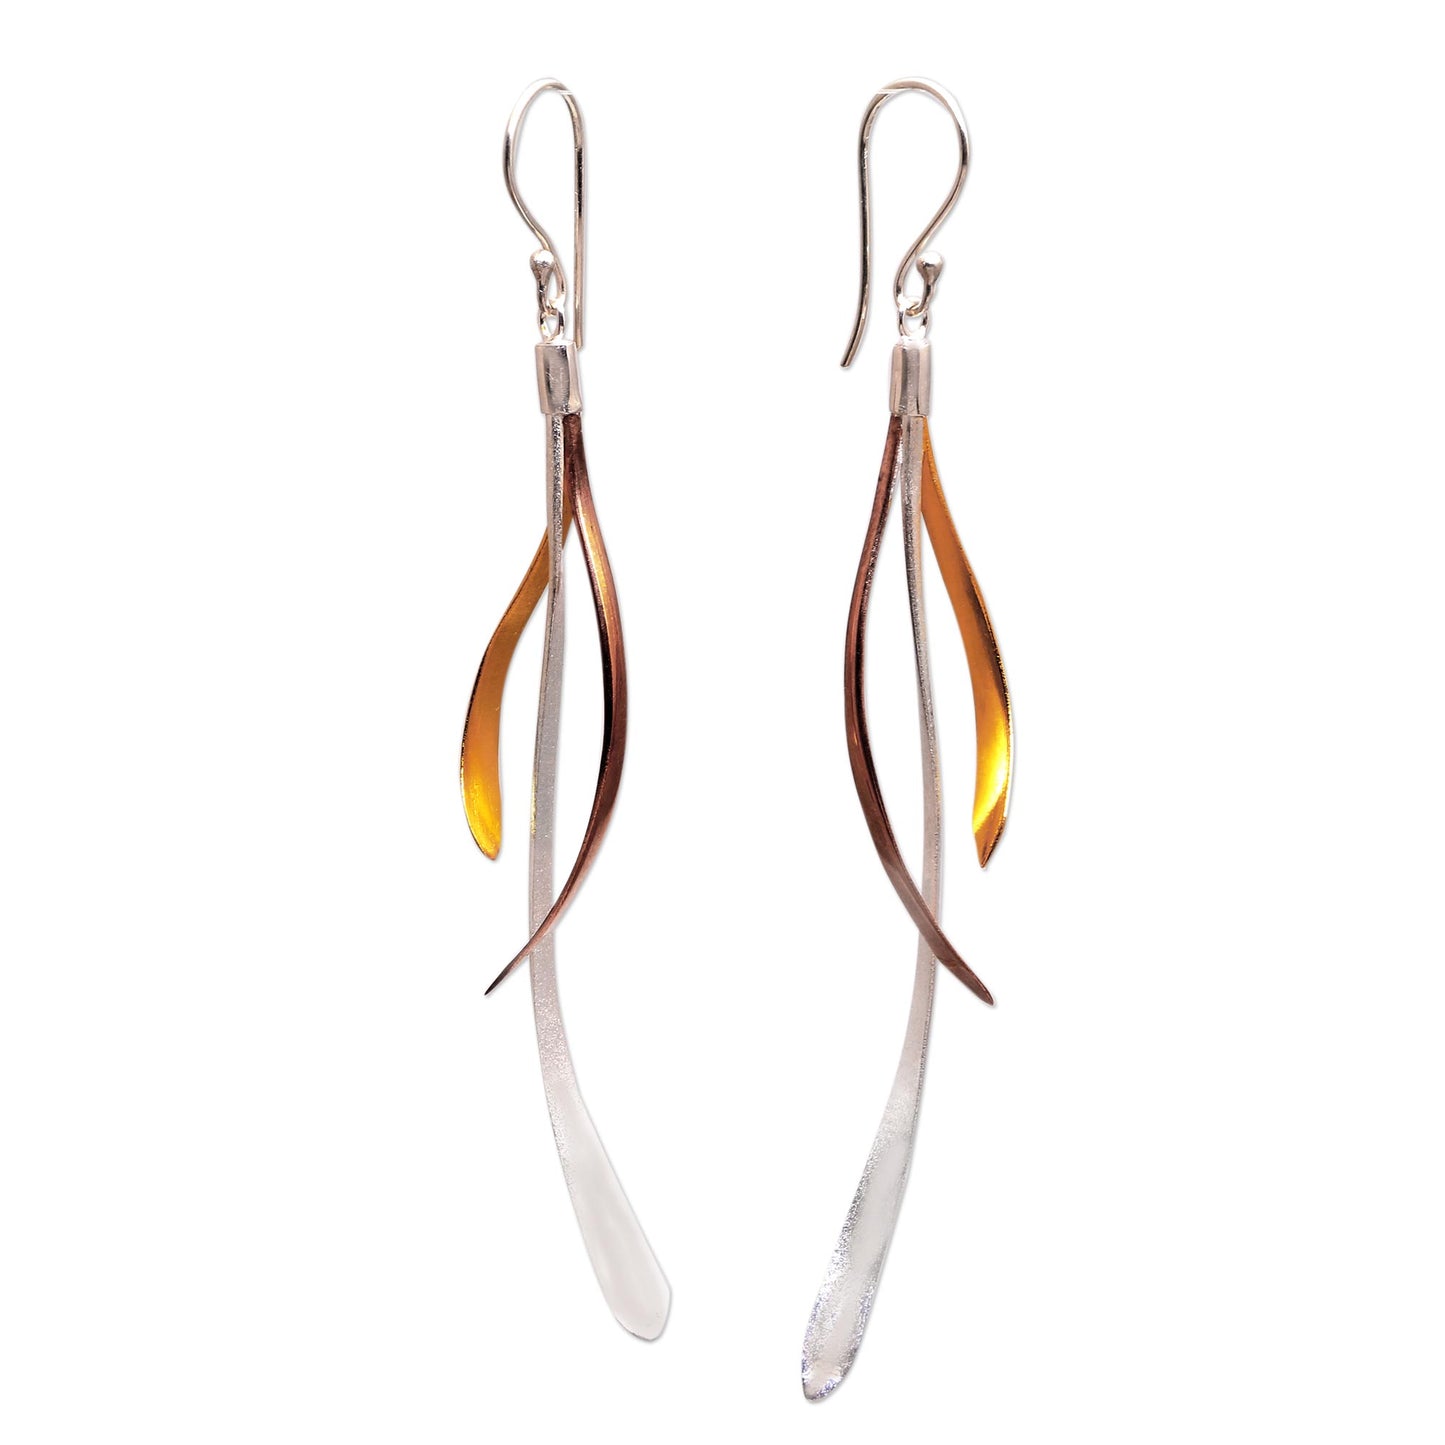 Jimbaran Tendrils Gold and Rose Gold Accent Sterling Silver Earrings from Bali